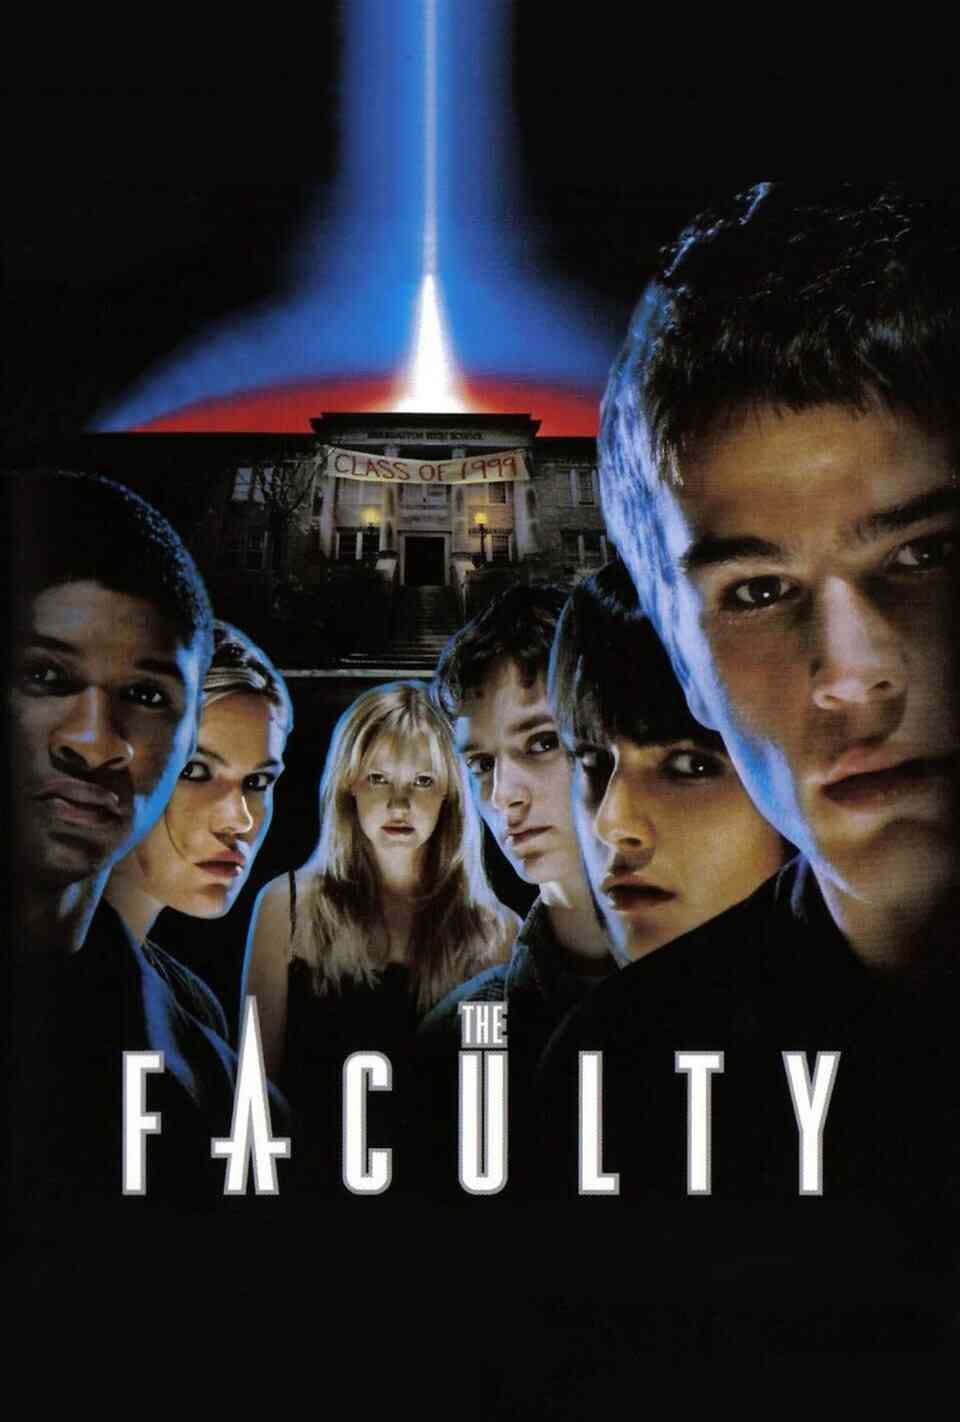 Read The Faculty screenplay (poster)